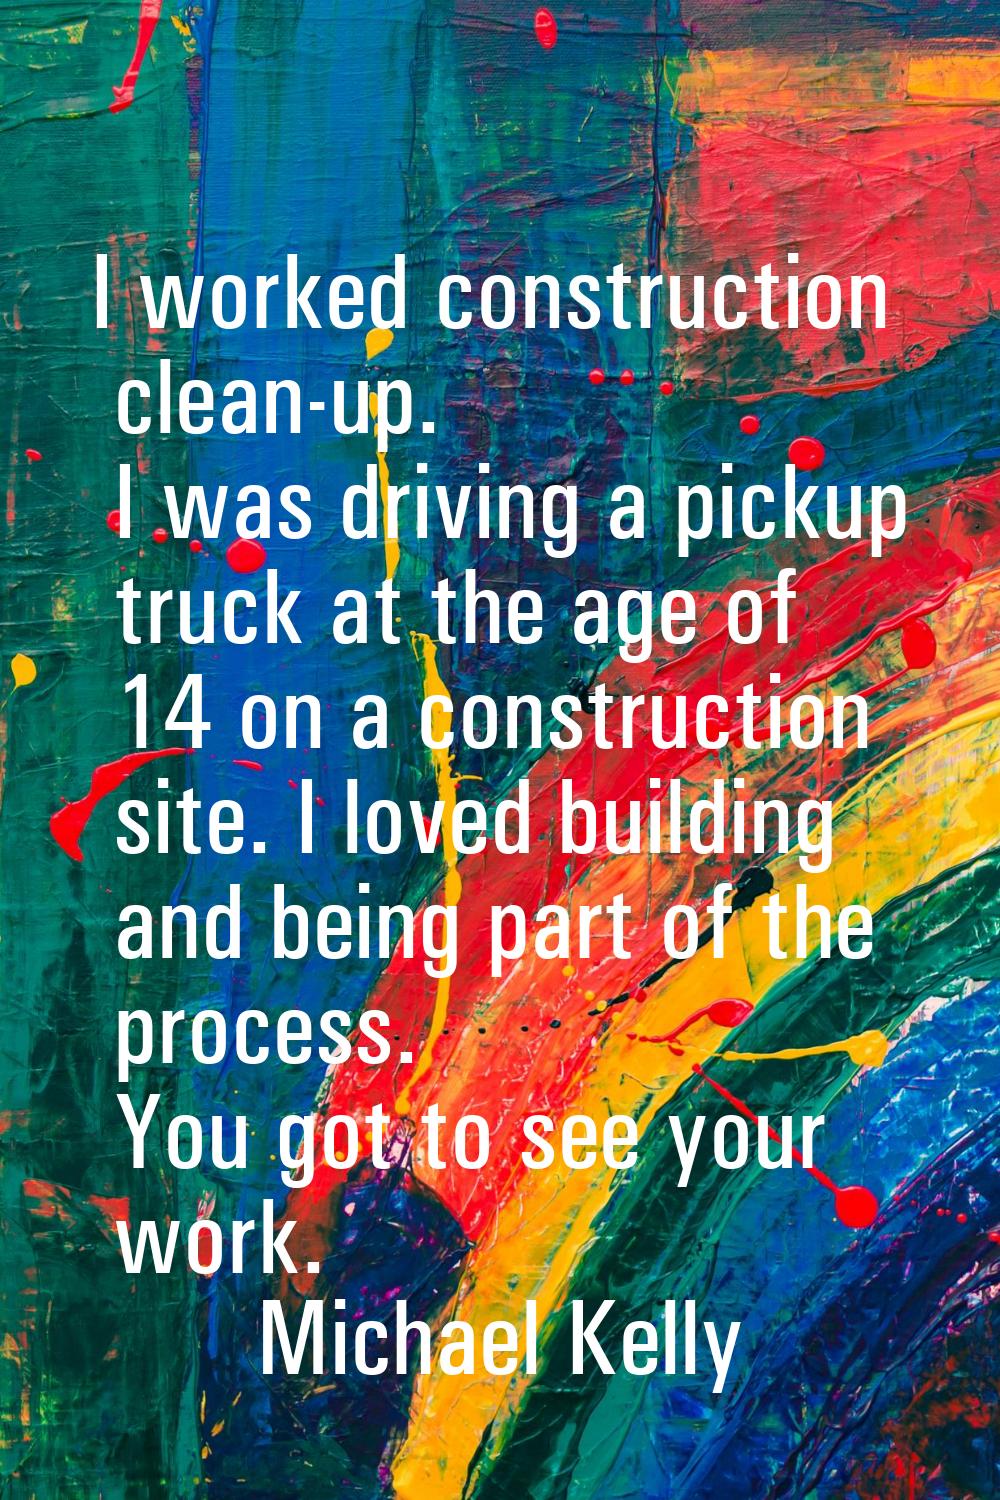 I worked construction clean-up. I was driving a pickup truck at the age of 14 on a construction sit